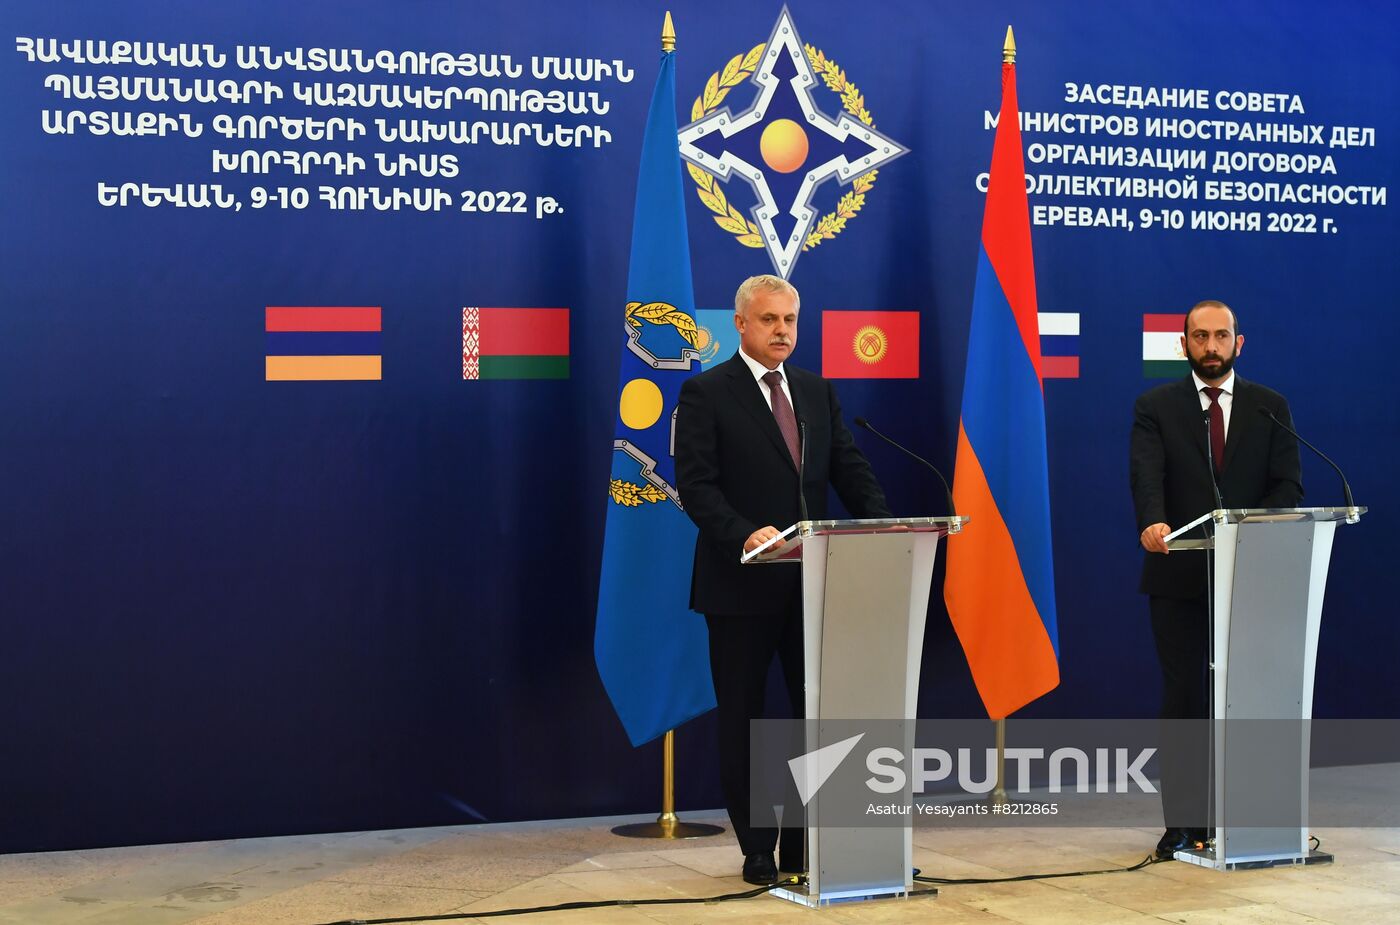 Armenia CSTO Foreign Ministers Council